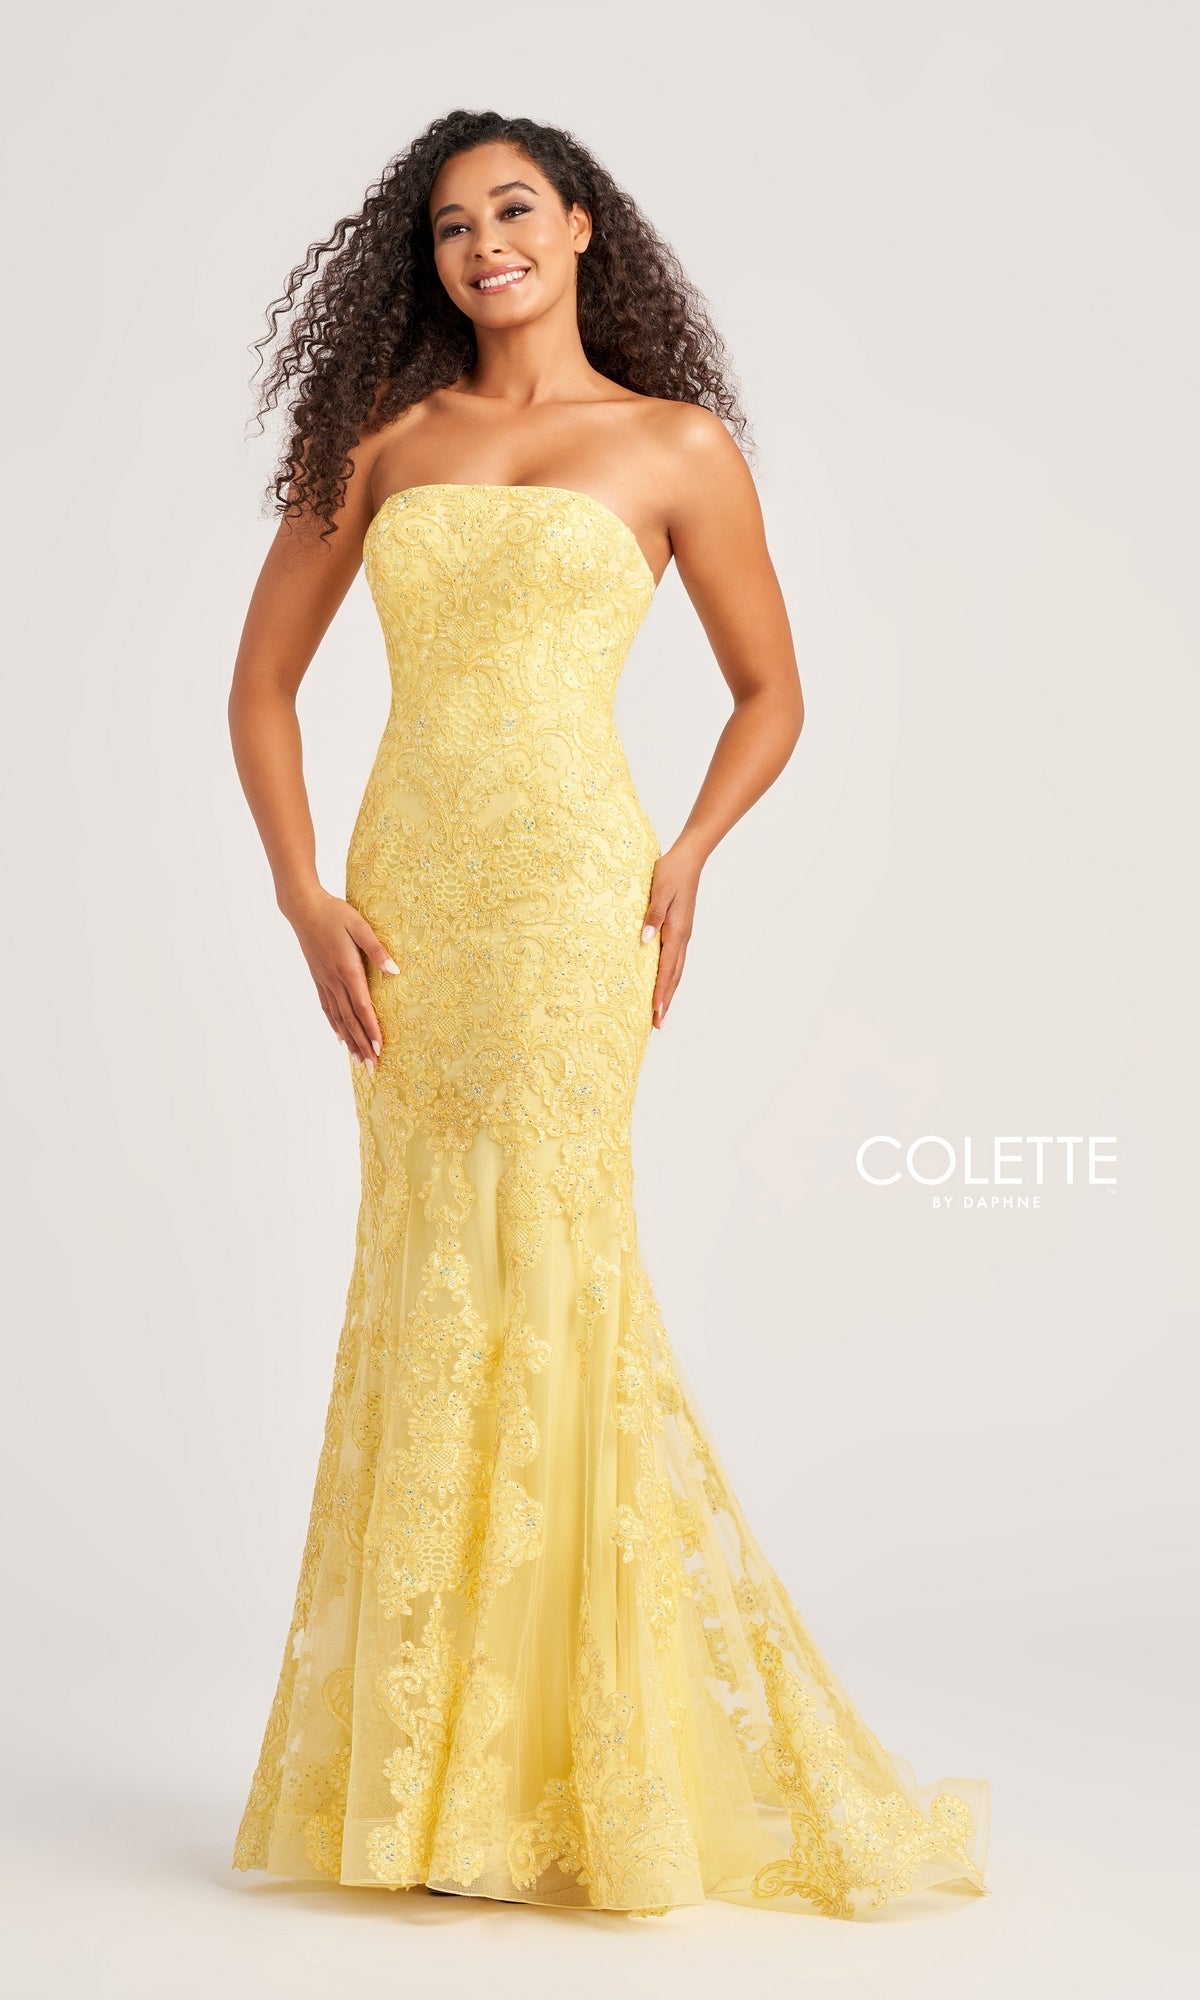 Colette Strapless Prom Dress with Train CL5123